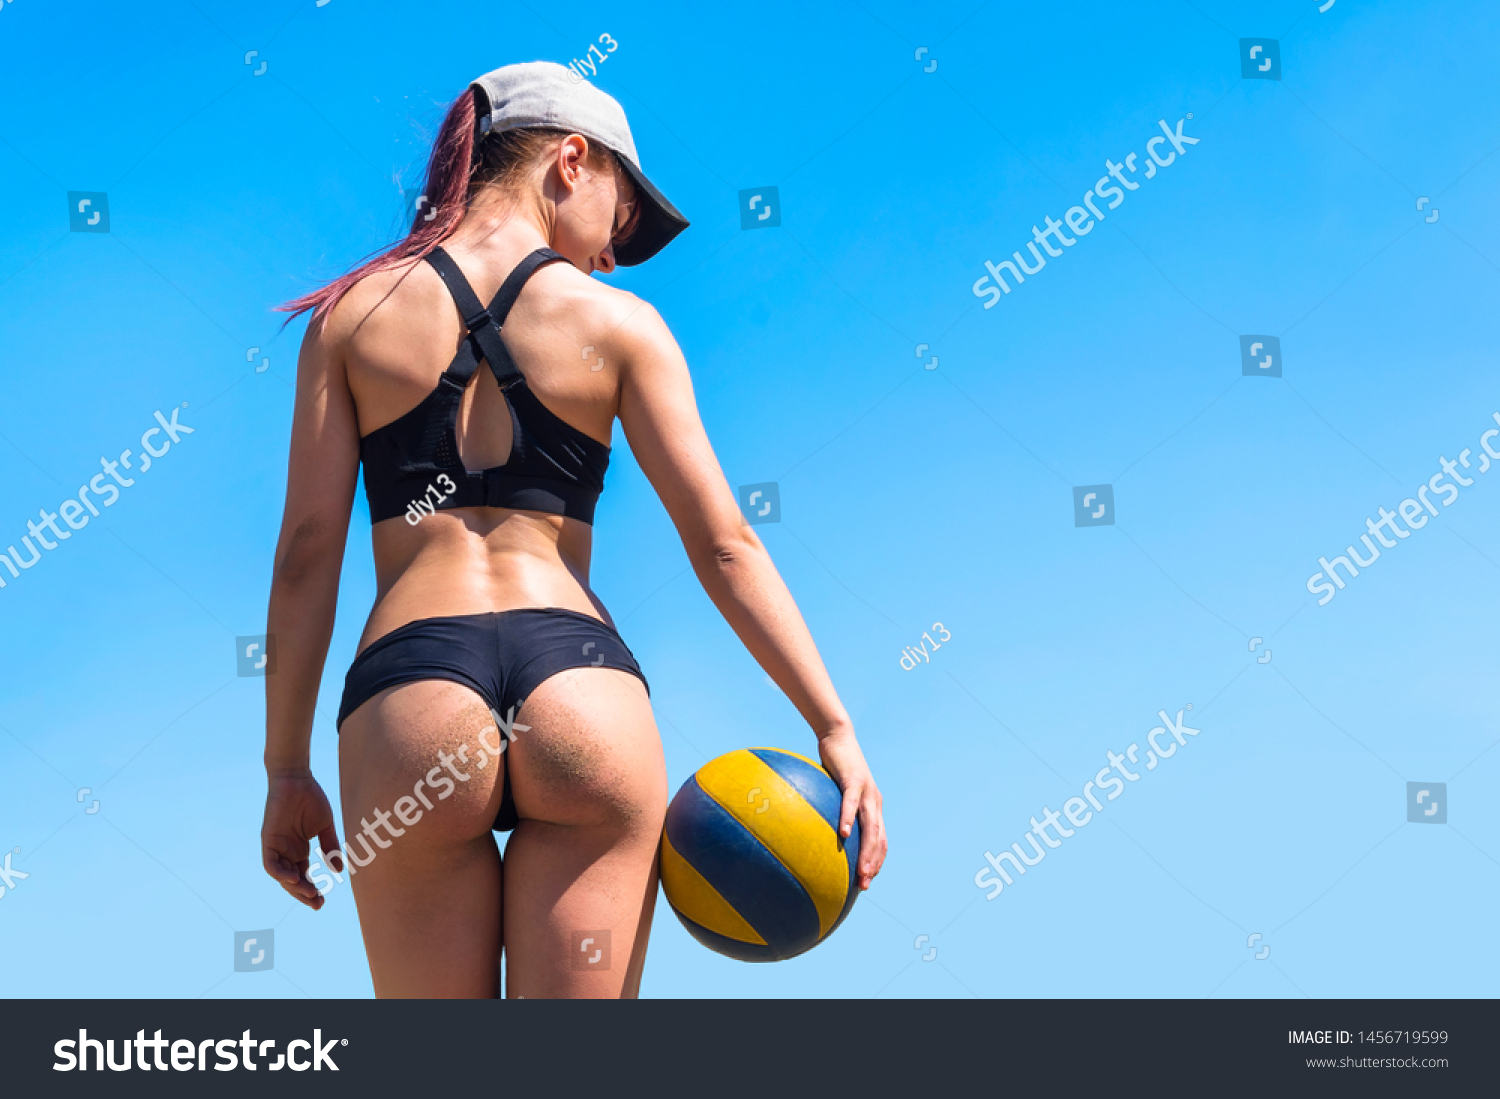 andrea aro recommends Sexy Volleyball Girls